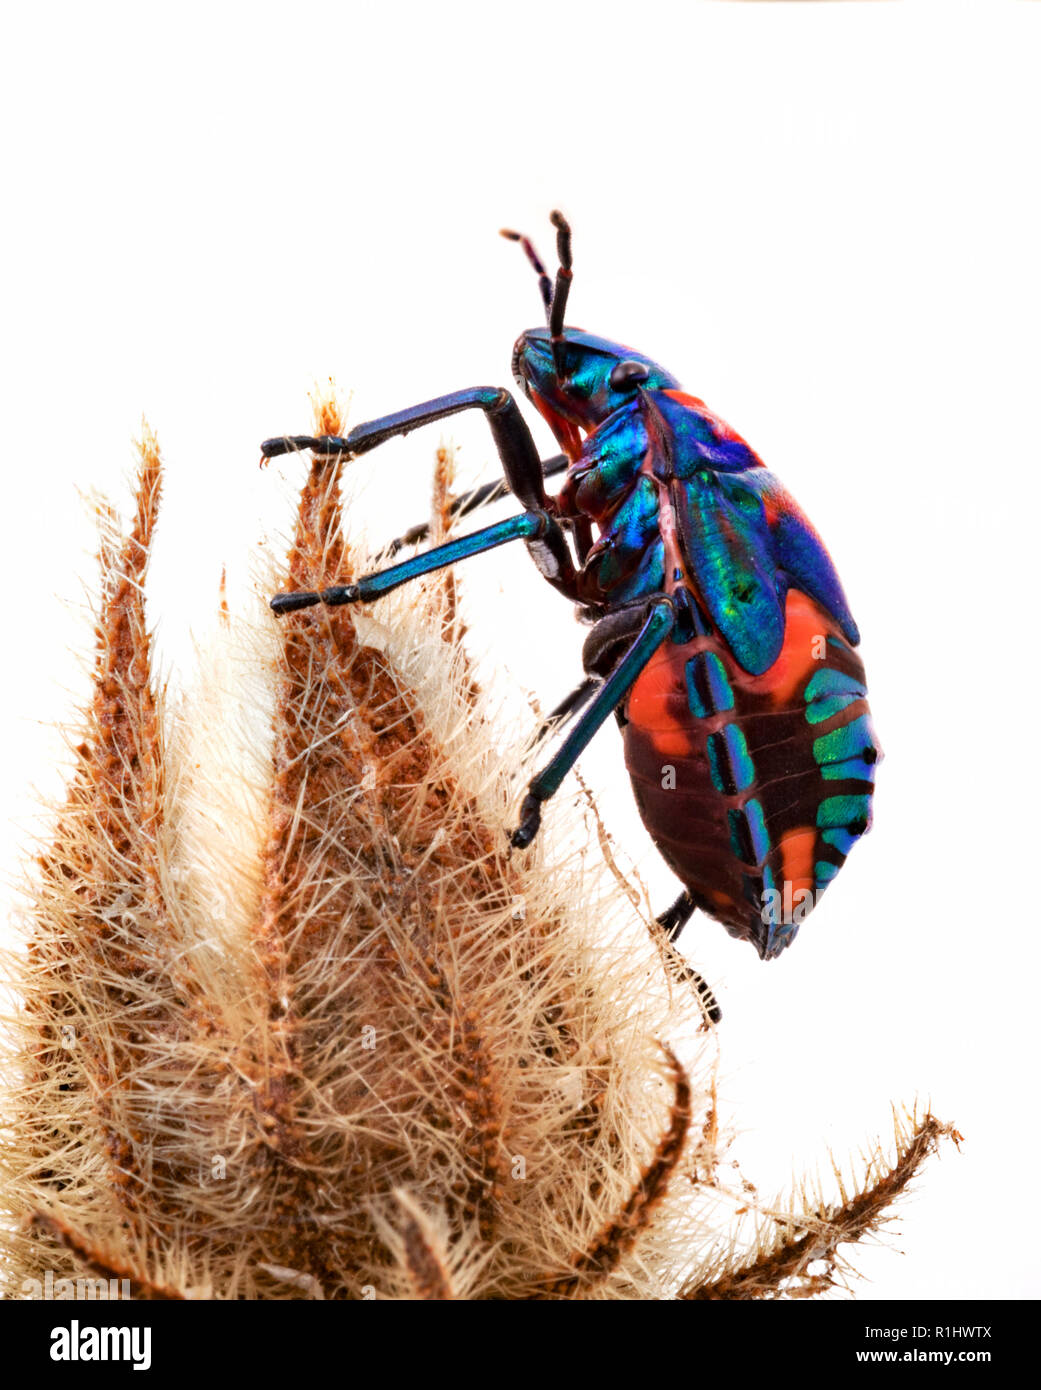 Tectocoris diophthalmus, commonly known as the Hibiscus Harlequin Bug or Cotton Harlequin Bug, is a brightly coloured convex and rounded shield-shaped Stock Photo